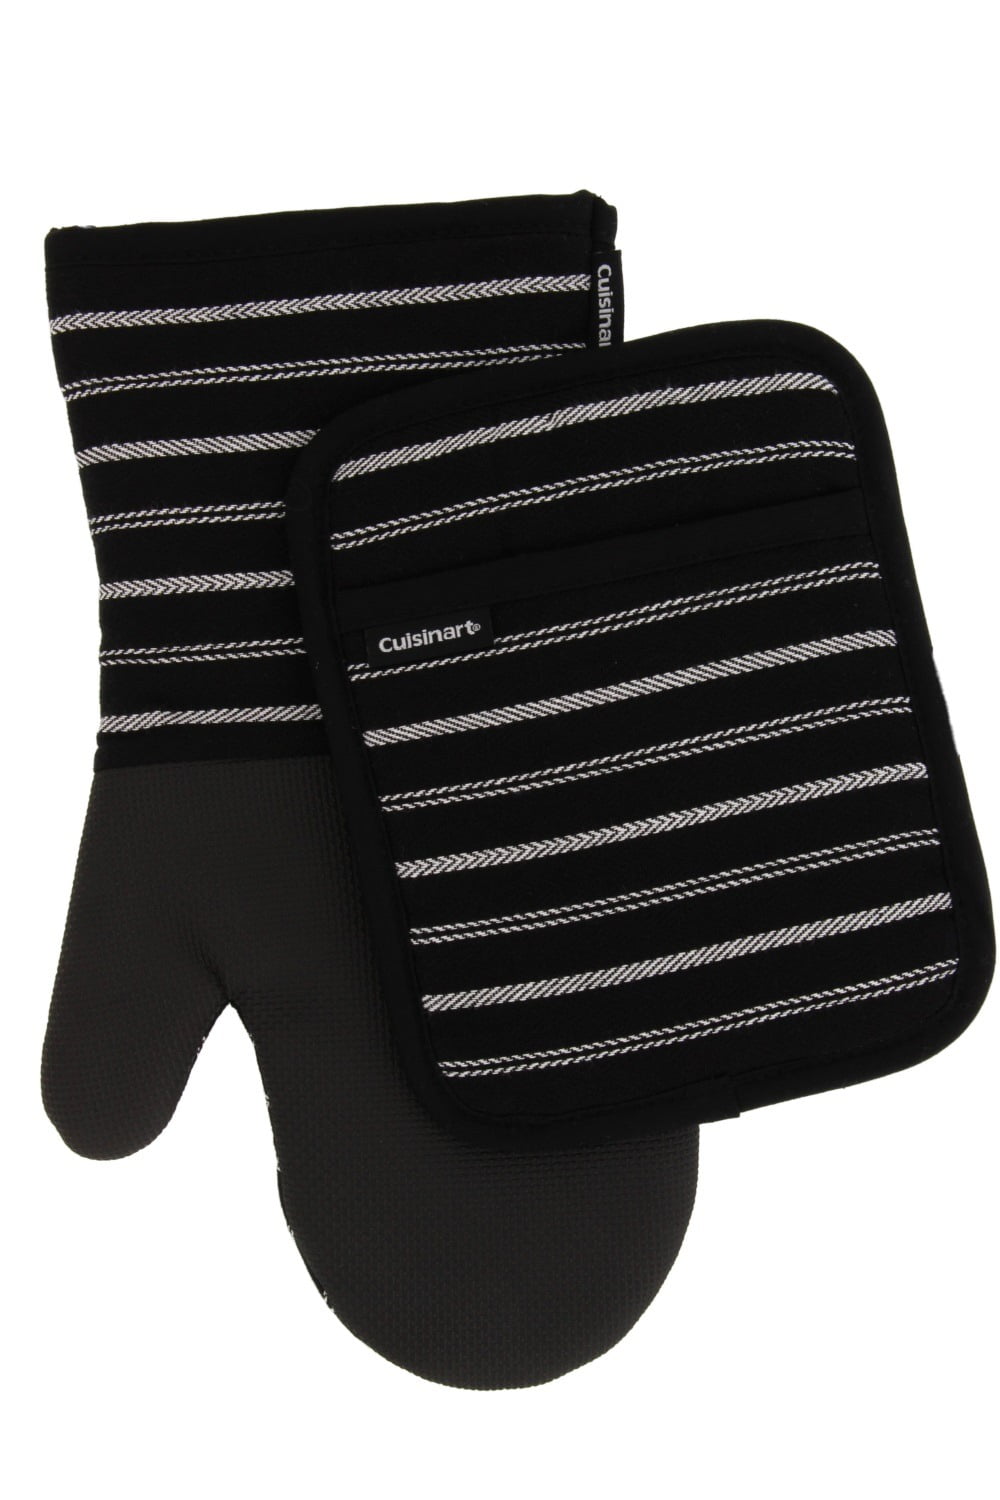 Cuisinart Neoprene Oven Mitts and Potholder Set -Heat Resistant Oven Gloves  to Protect Hands and Surfaces with Non-Slip Grip, Hanging Loop-Ideal for  Handling Hot Cookware Items, Twill Stripe Jet Black 